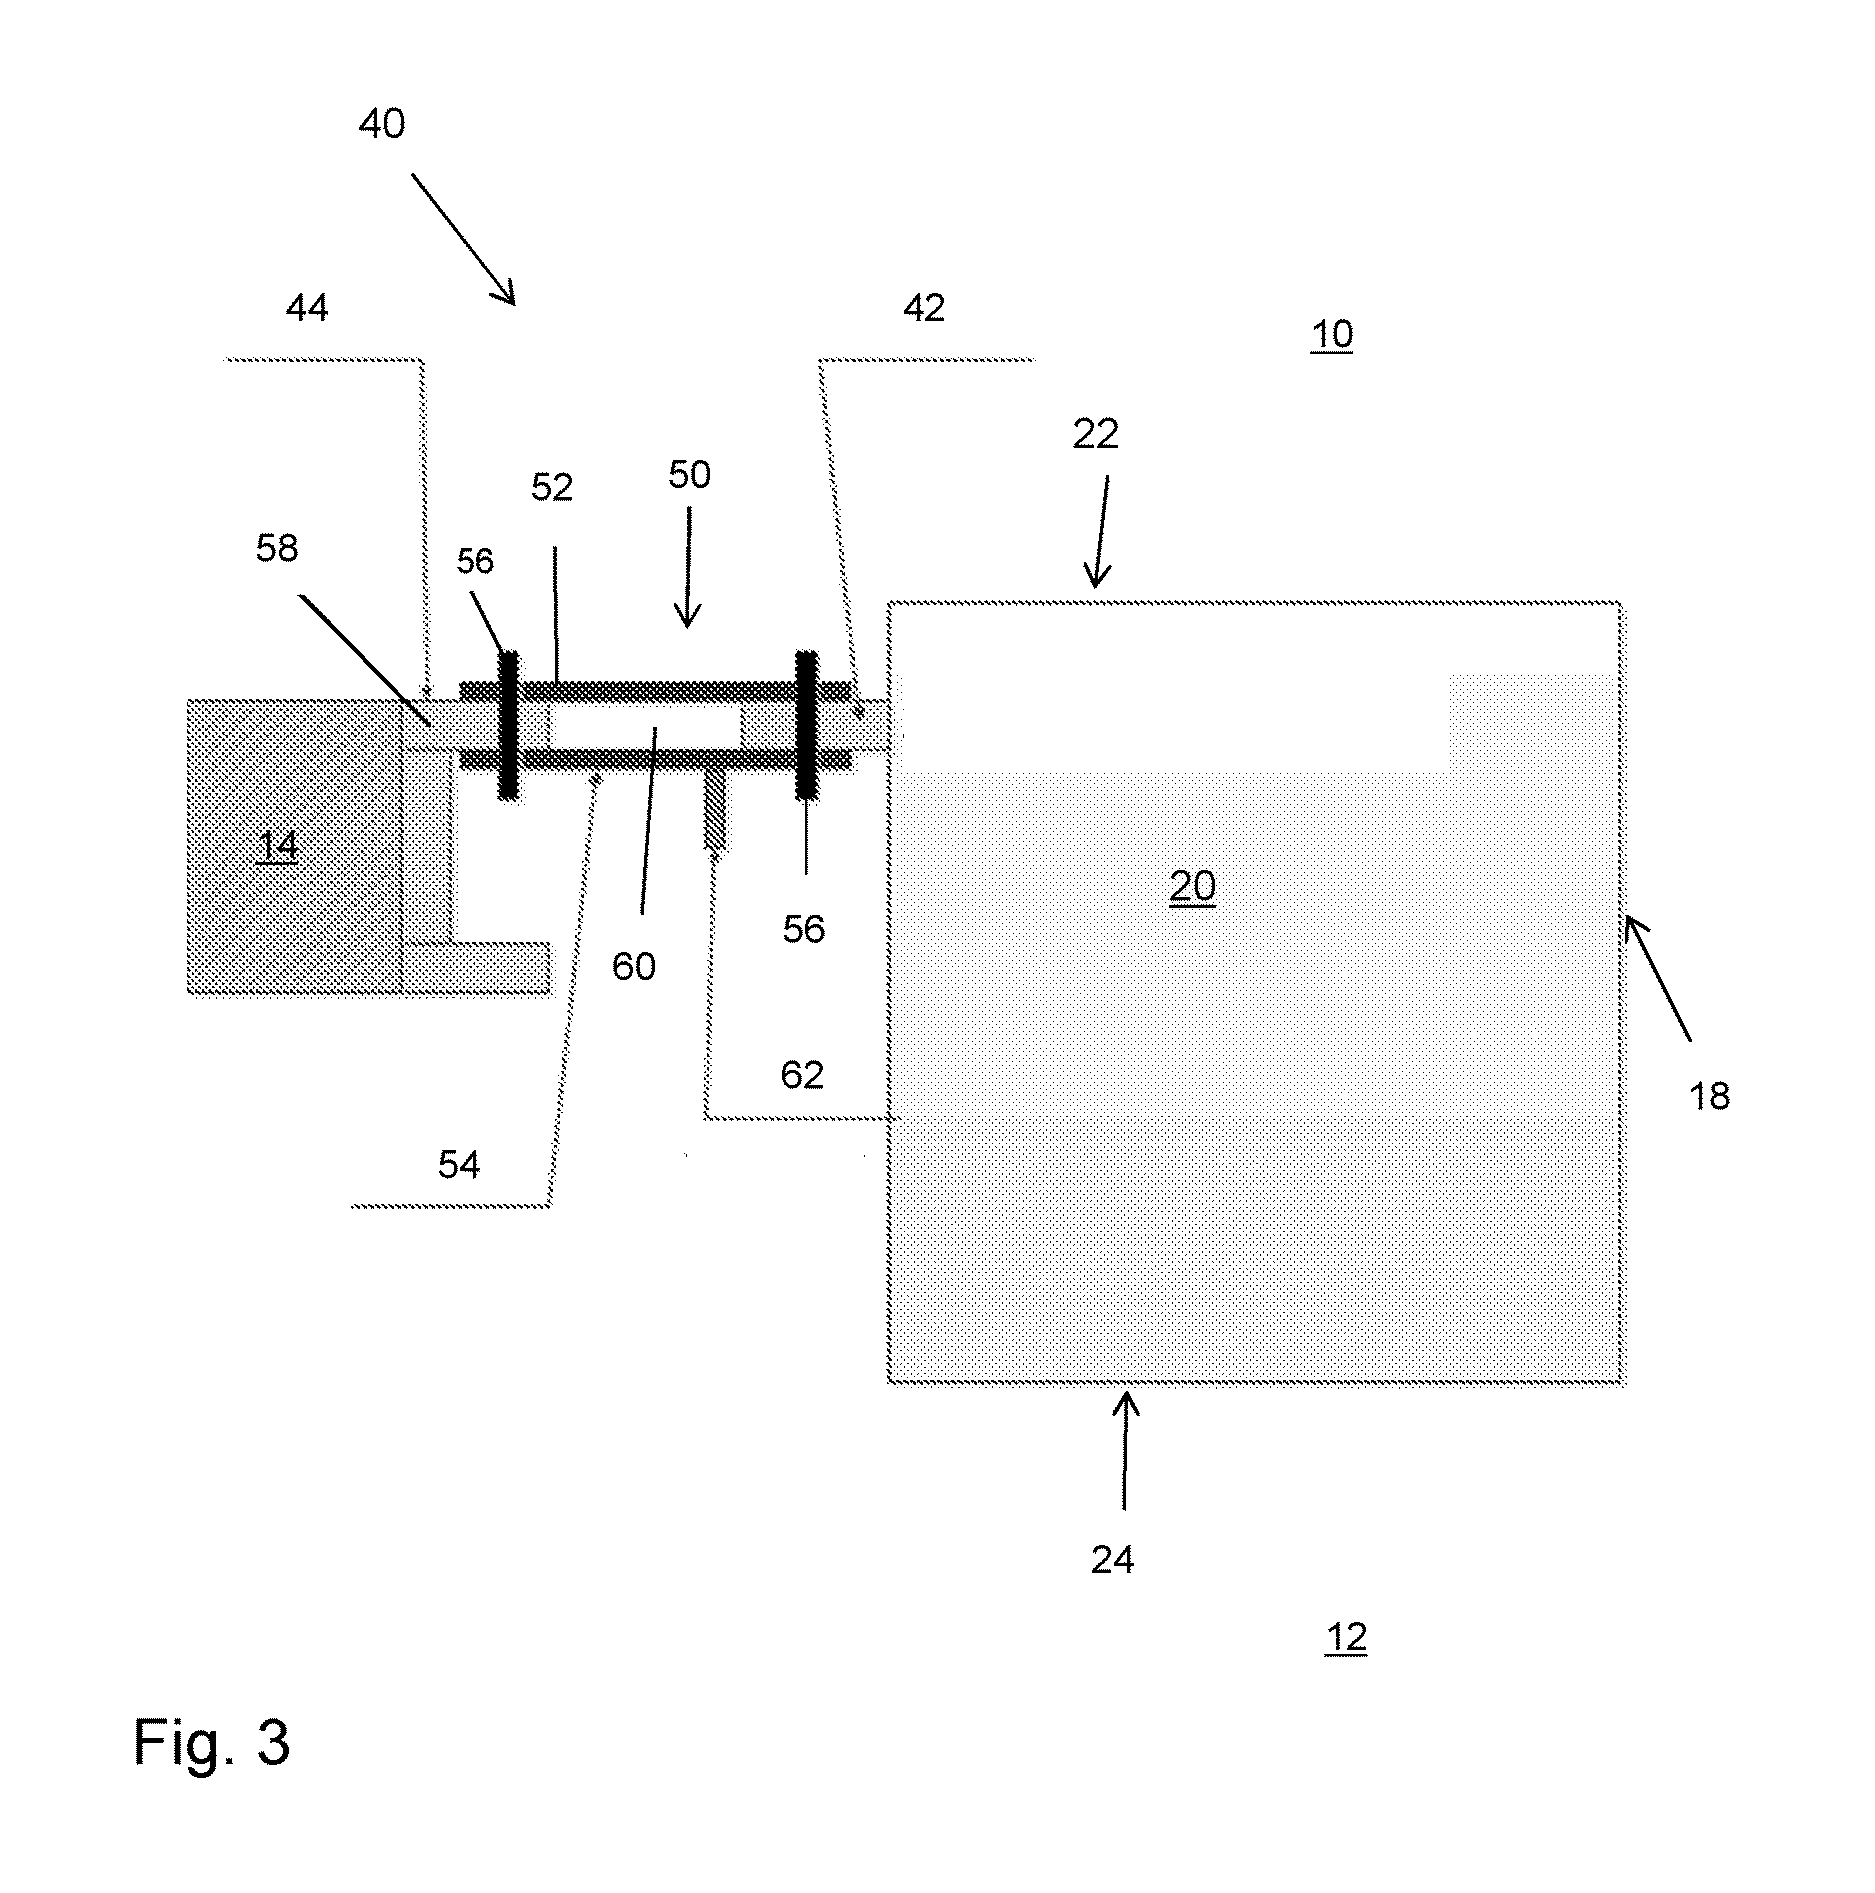 Apparatus and method for sealing zones or rooms